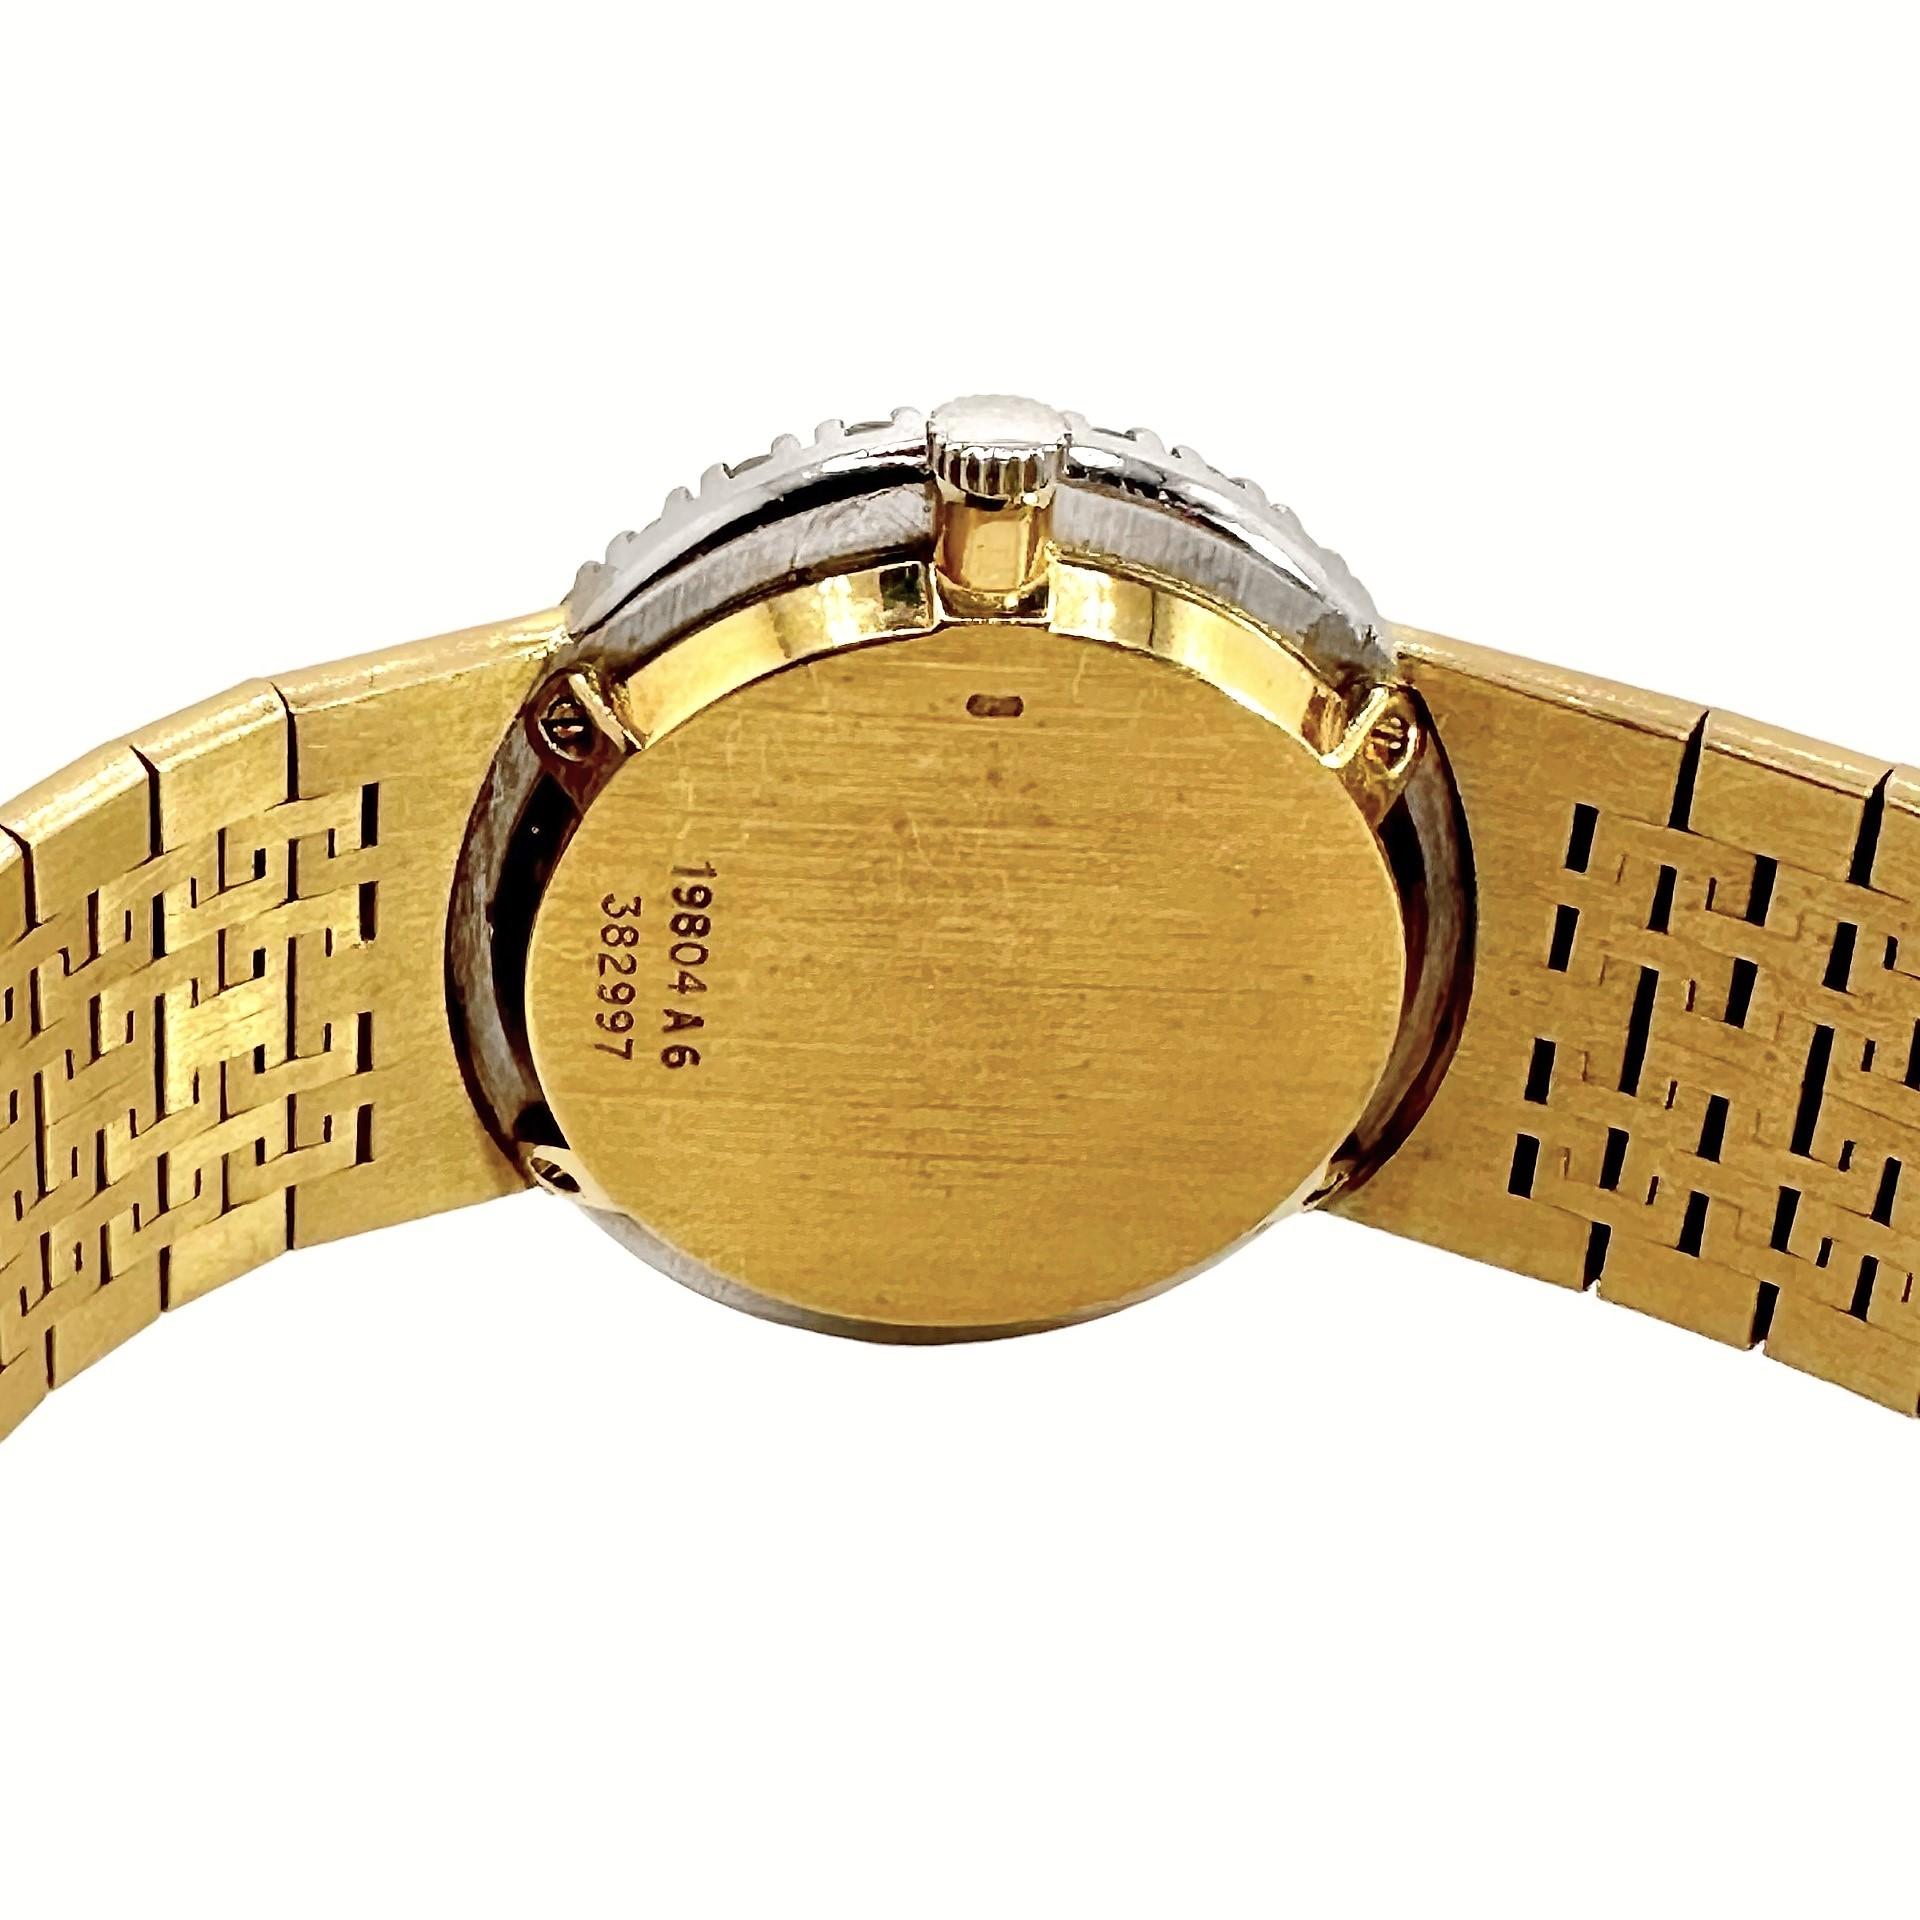 Modern Classic Ladies Mid-20th Century Piaget, 18k Yellow Gold and Diamond Oval Watch